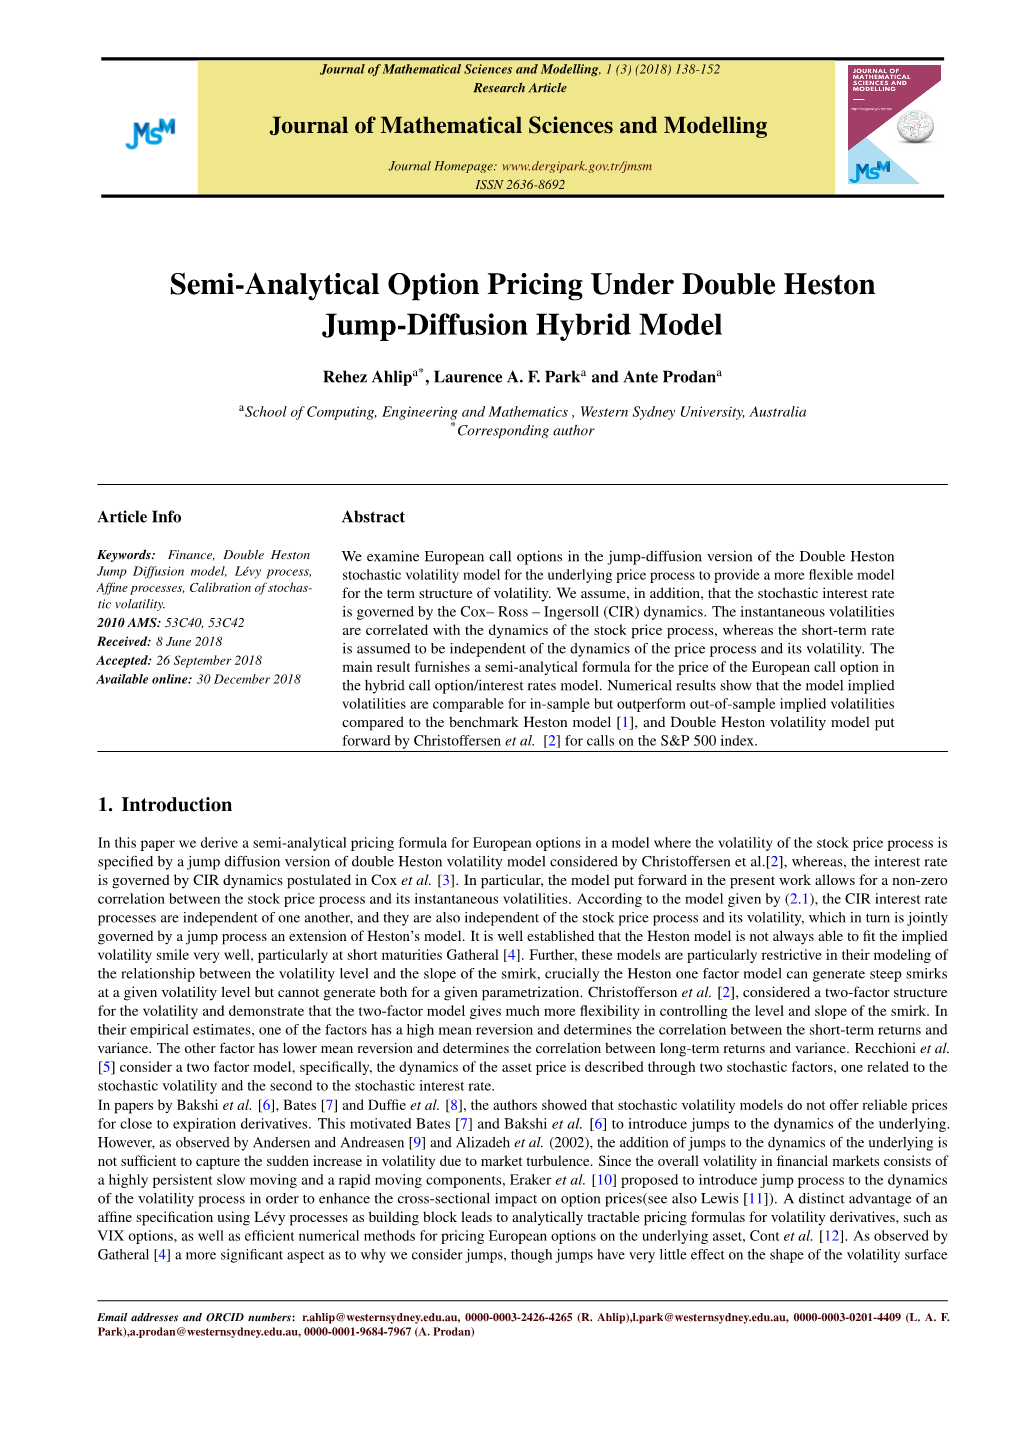 Semi-Analytical Option Pricing Under Double Heston Jump-Diffusion Hybrid Model